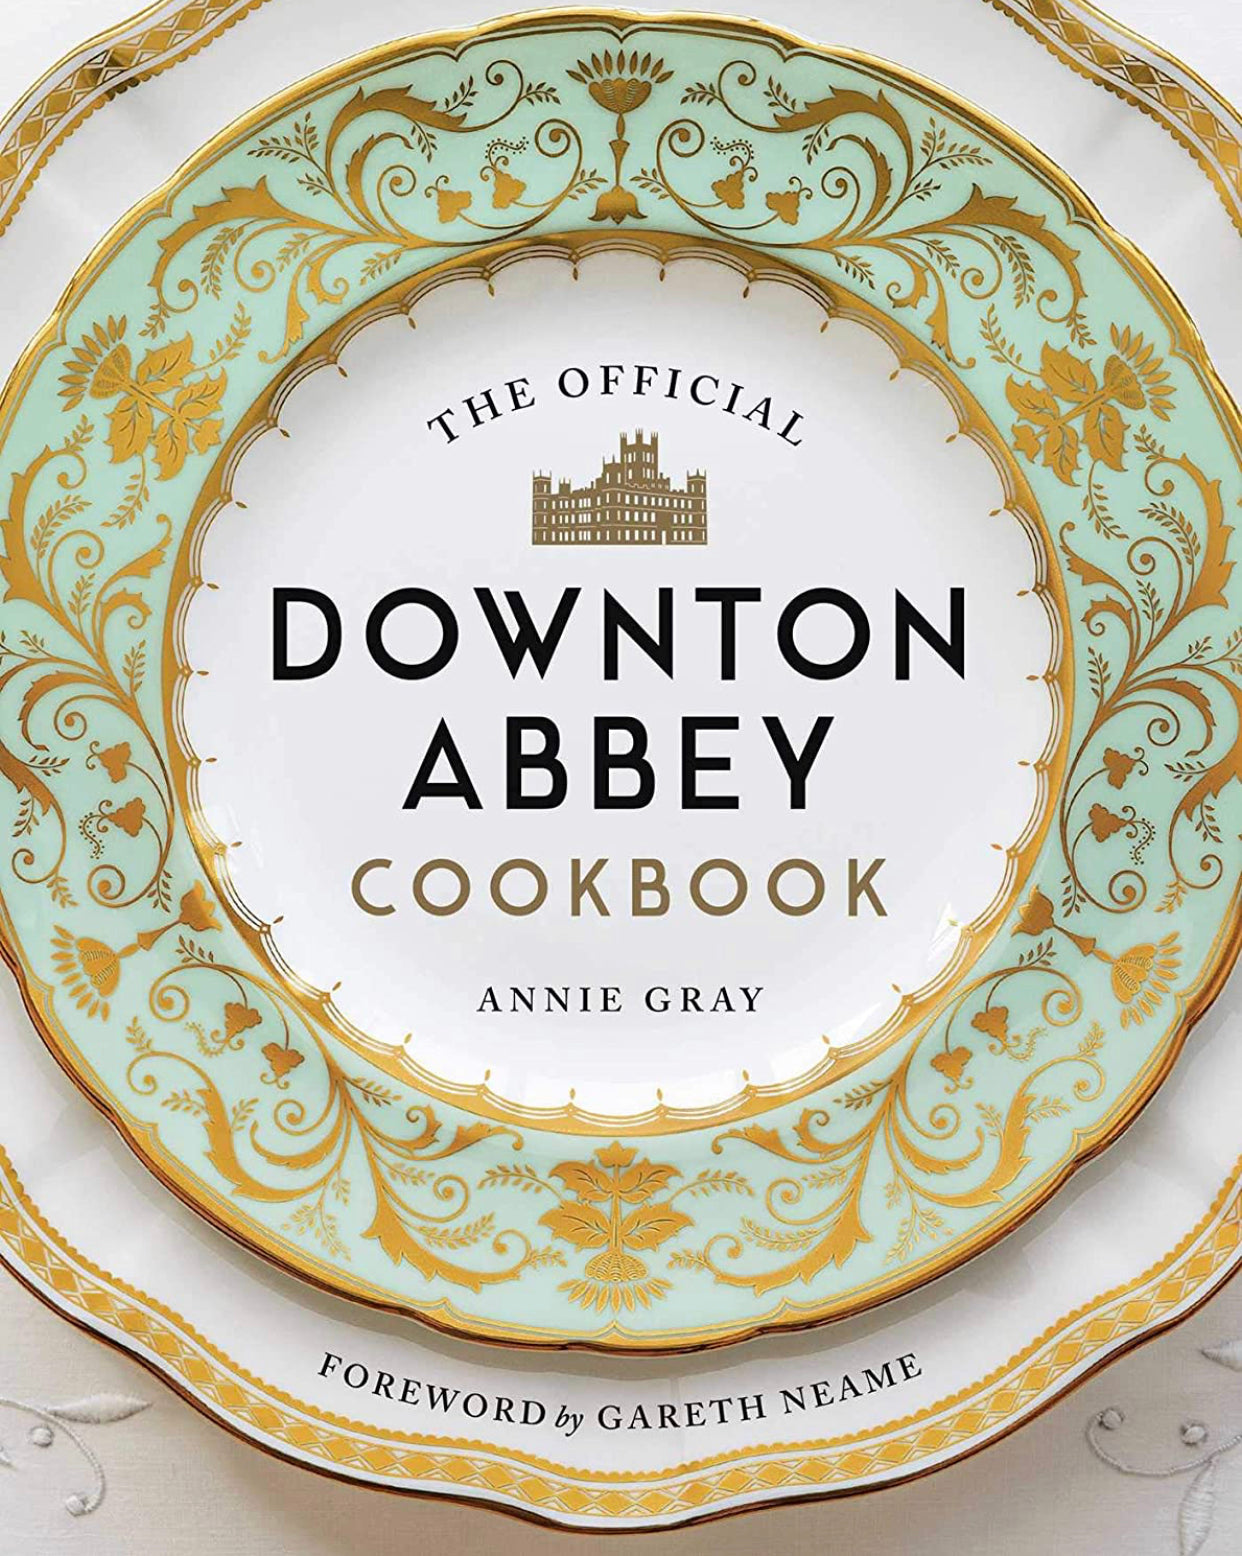 Downtown Abbey Cookbook